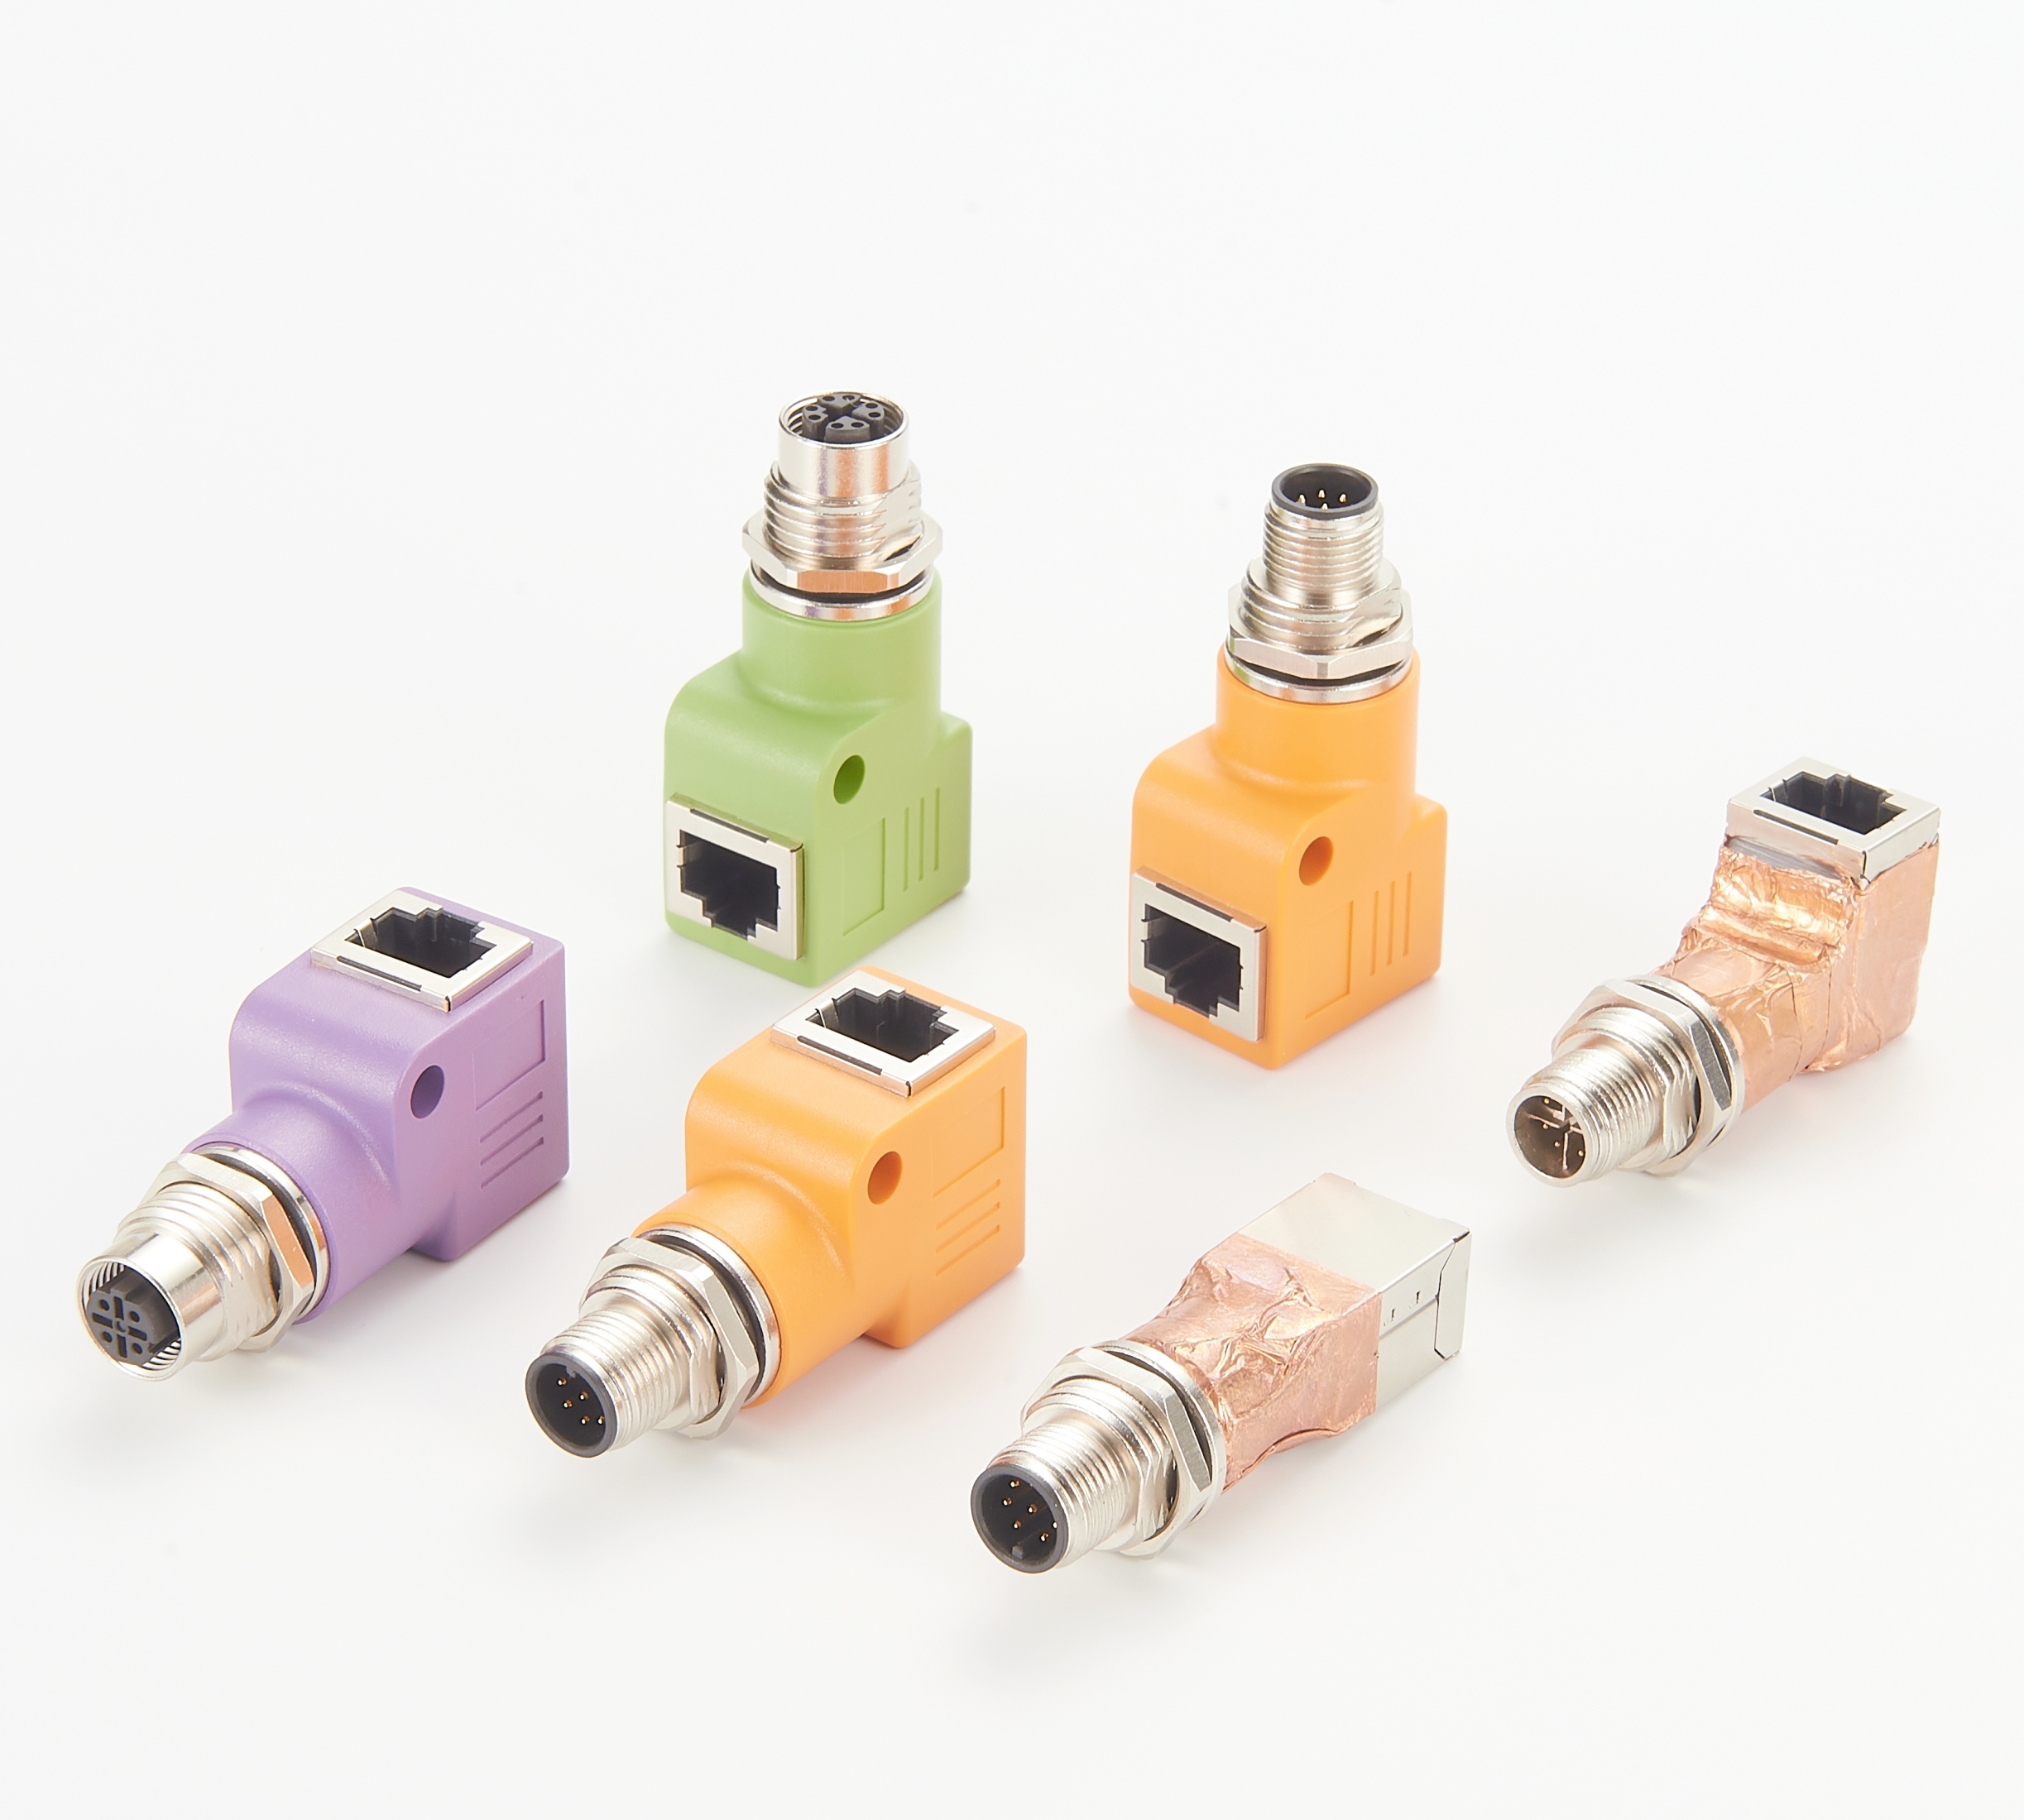 M12 Connector mounting solutions